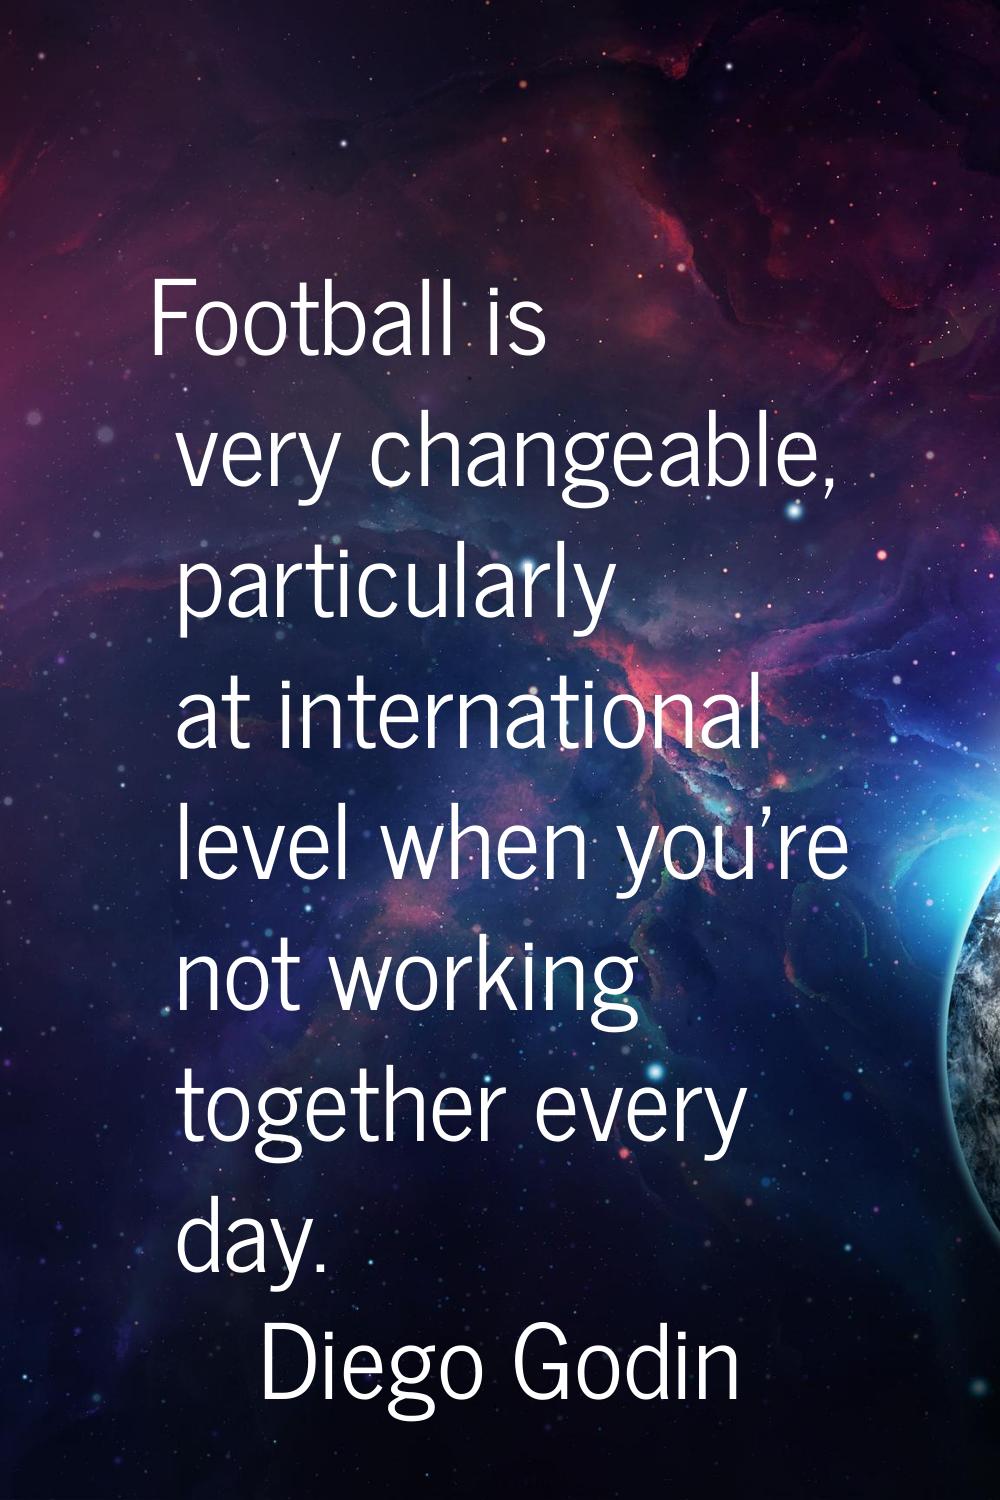 Football is very changeable, particularly at international level when you're not working together e